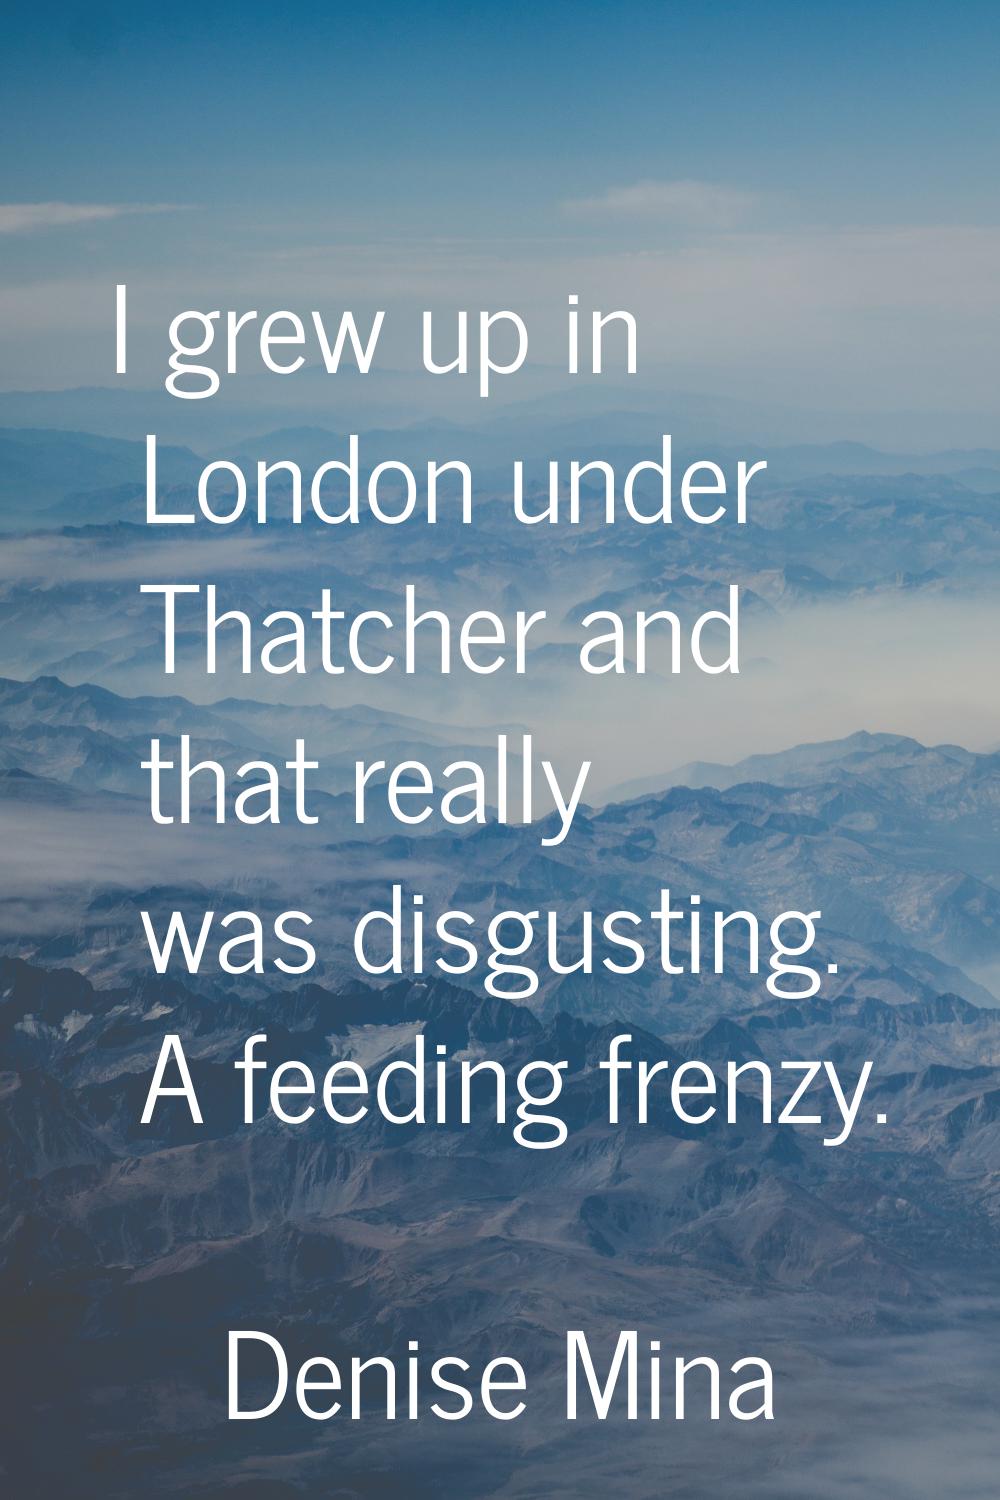 I grew up in London under Thatcher and that really was disgusting. A feeding frenzy.